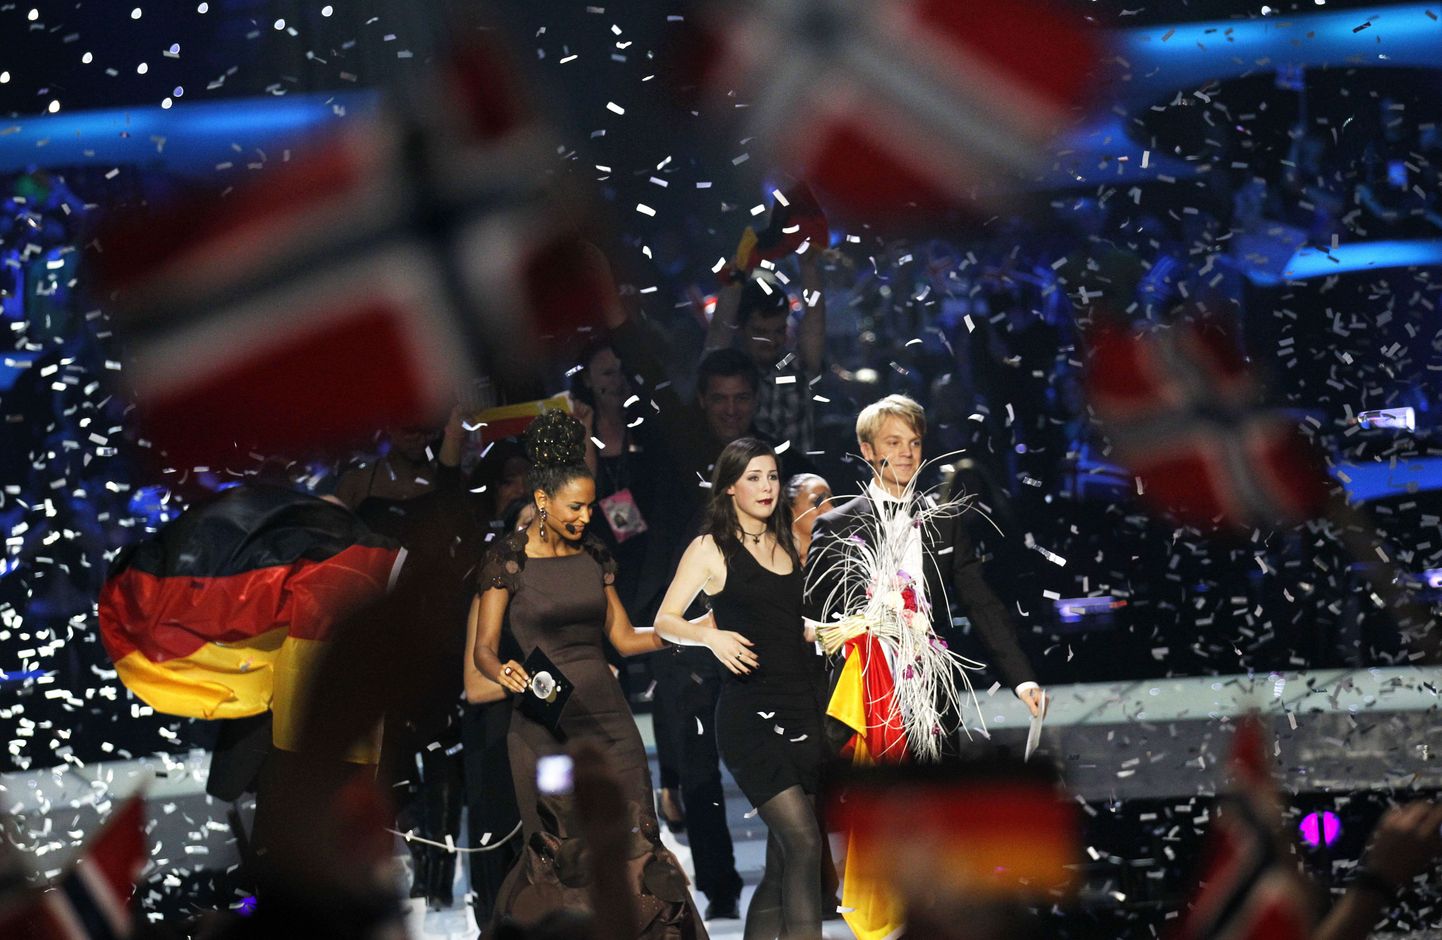 Germany's Lena (C) celebrates after winning the final of the Eurovision Song Contest 2010 at the Telenor Arena in Baerum, near Oslo, Norway, on May 29, 2010. The 55th annual competition was expected to be watched by more than 120 million viewers in 39 European countries.  AFP PHOTO / DANIEL SANNUM LAUTEN